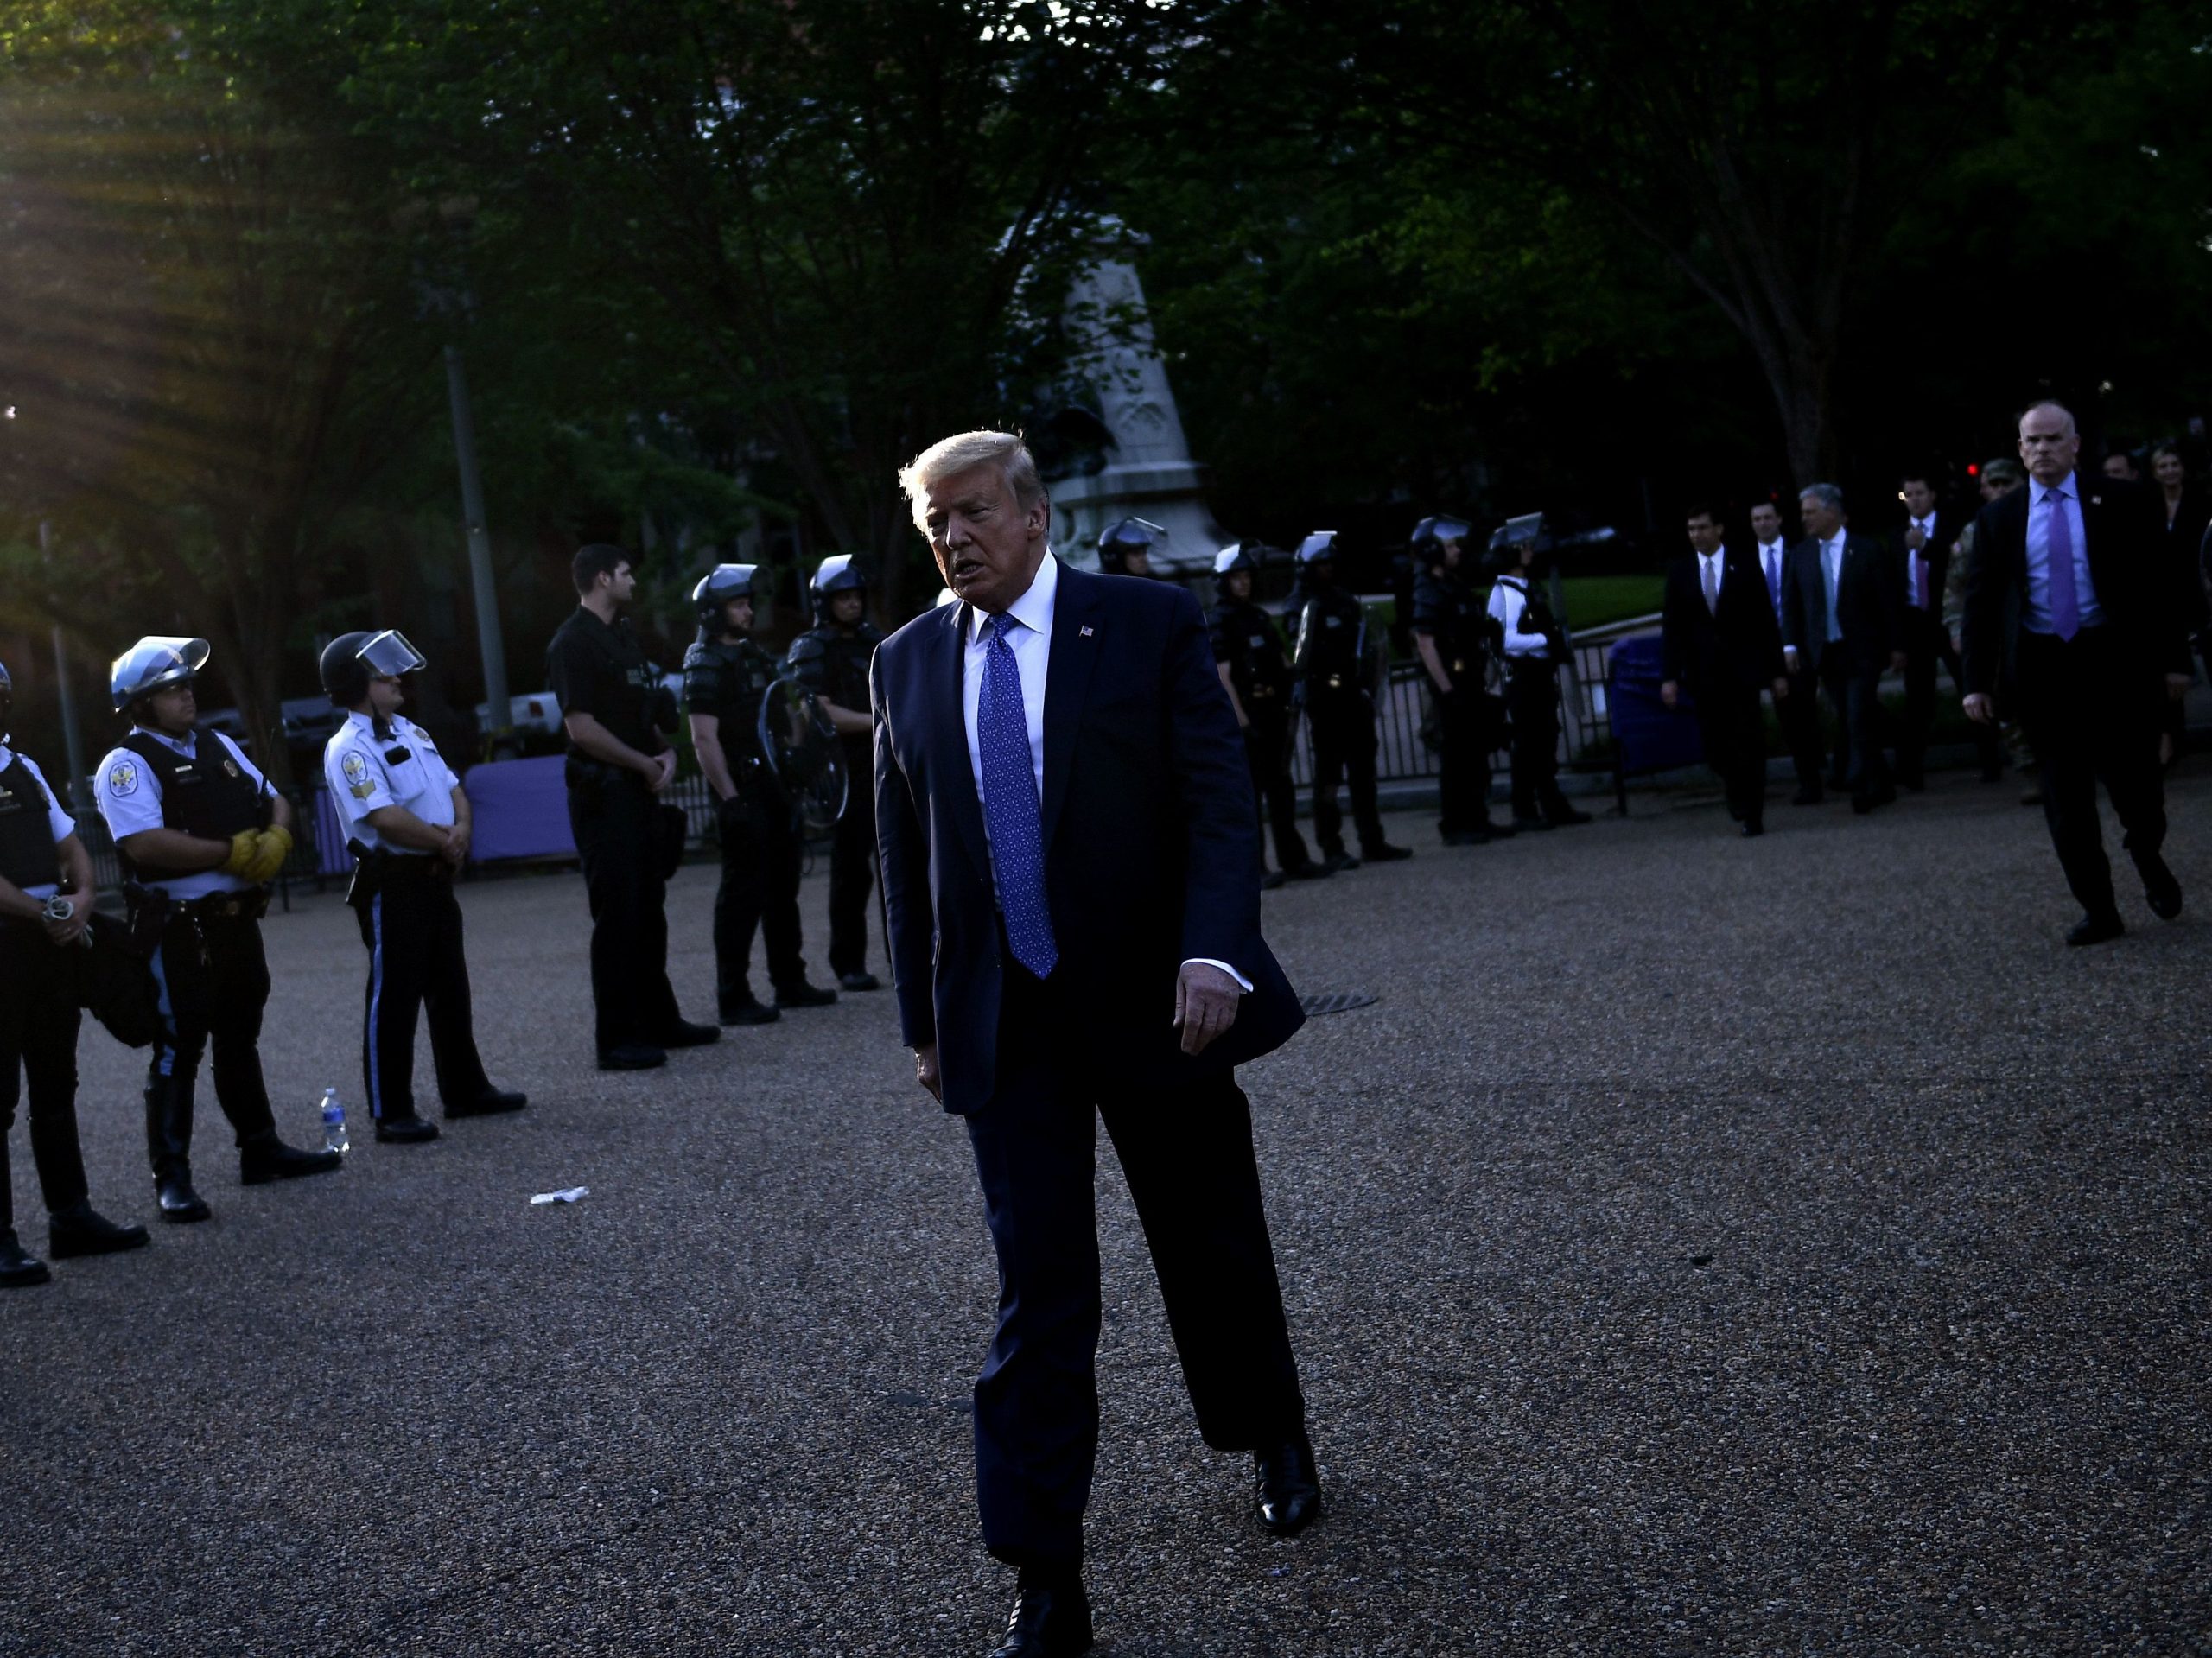 President Trump walks back to the White House escorted by the Secret Service after appearing outside of St John's Episcopal church across Lafayette Park in Washington, D.C., on Monday.